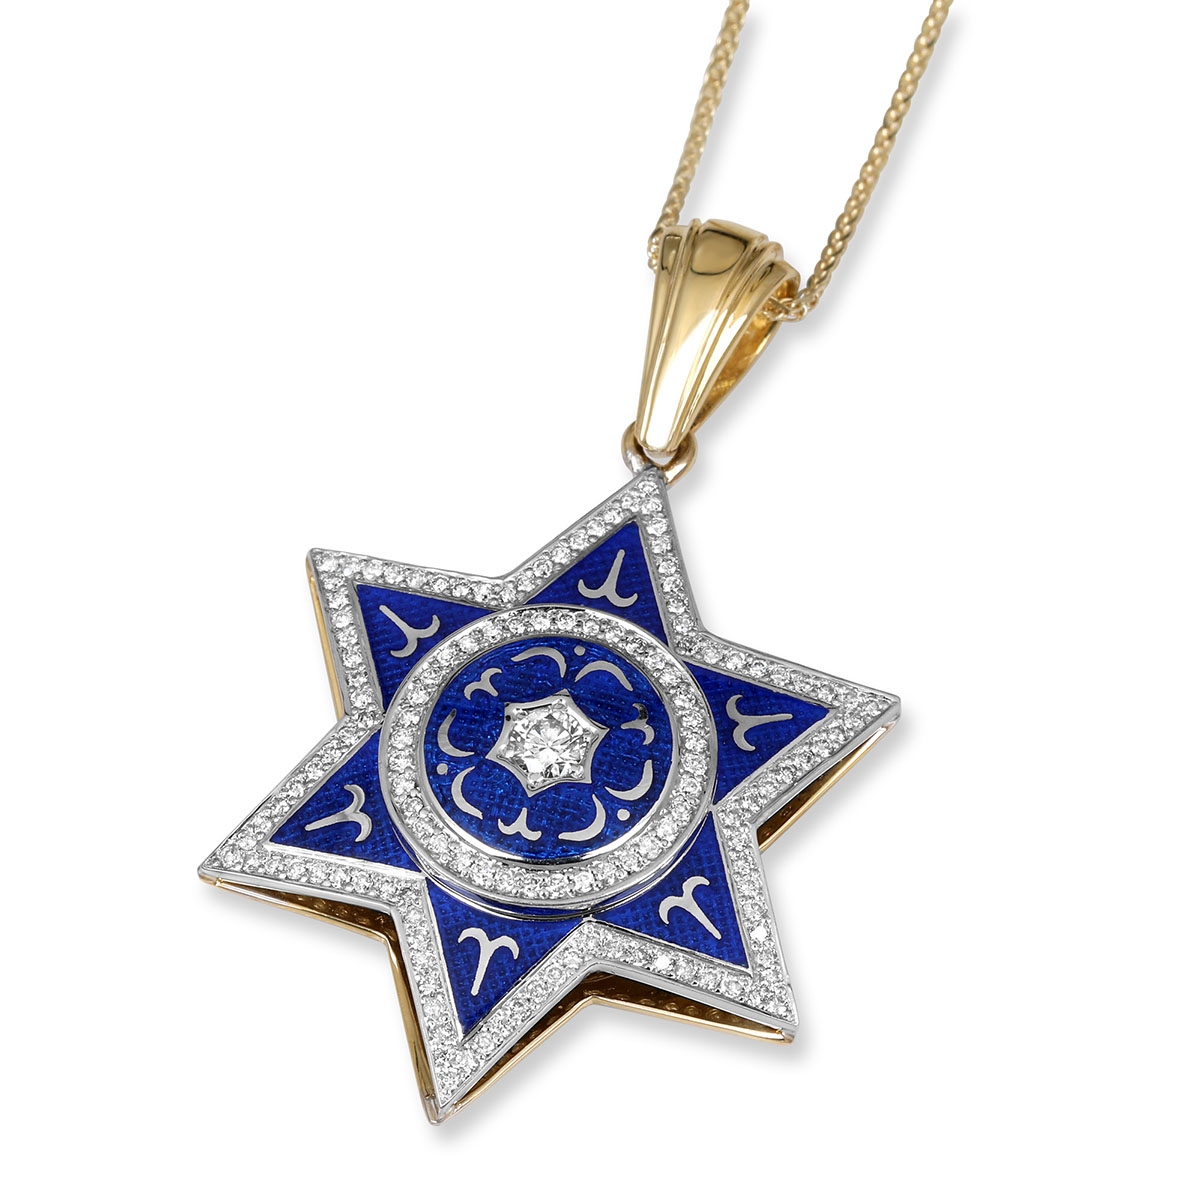 Anbinder Jewelry Two-Toned 14K Gold and Blue Enamel Star of David Pendant With White Diamonds - 1